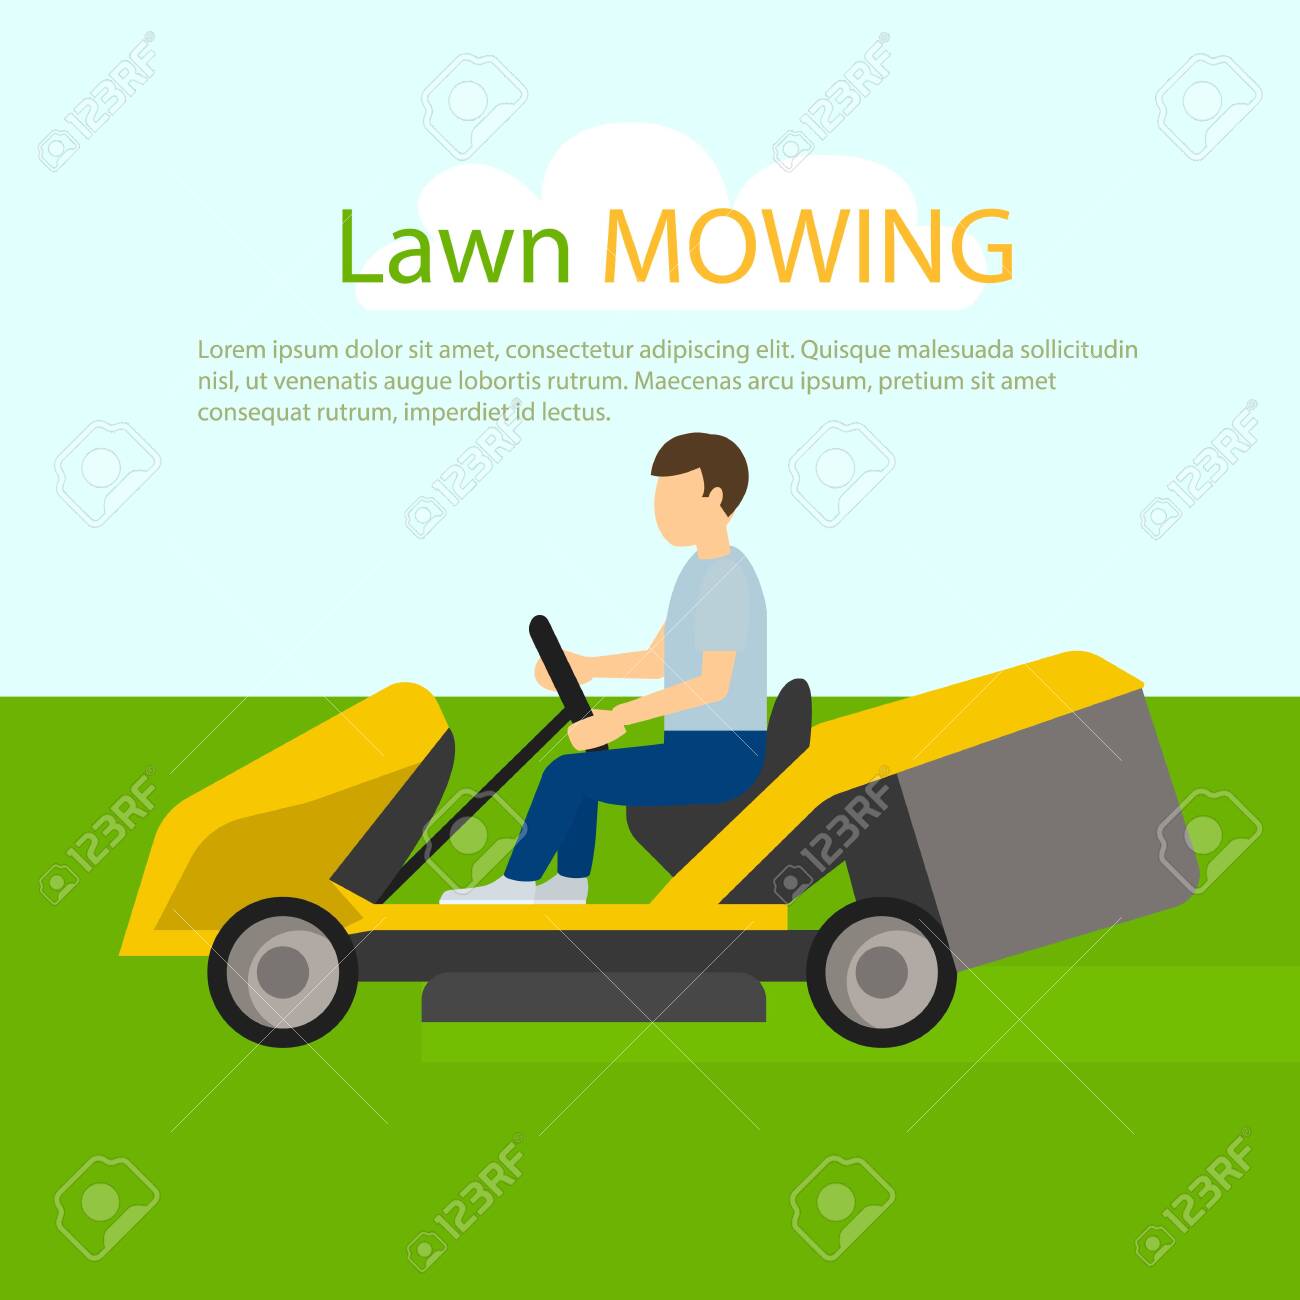 Tractor Lawn Mowing Concept Background Flat Illustration Of